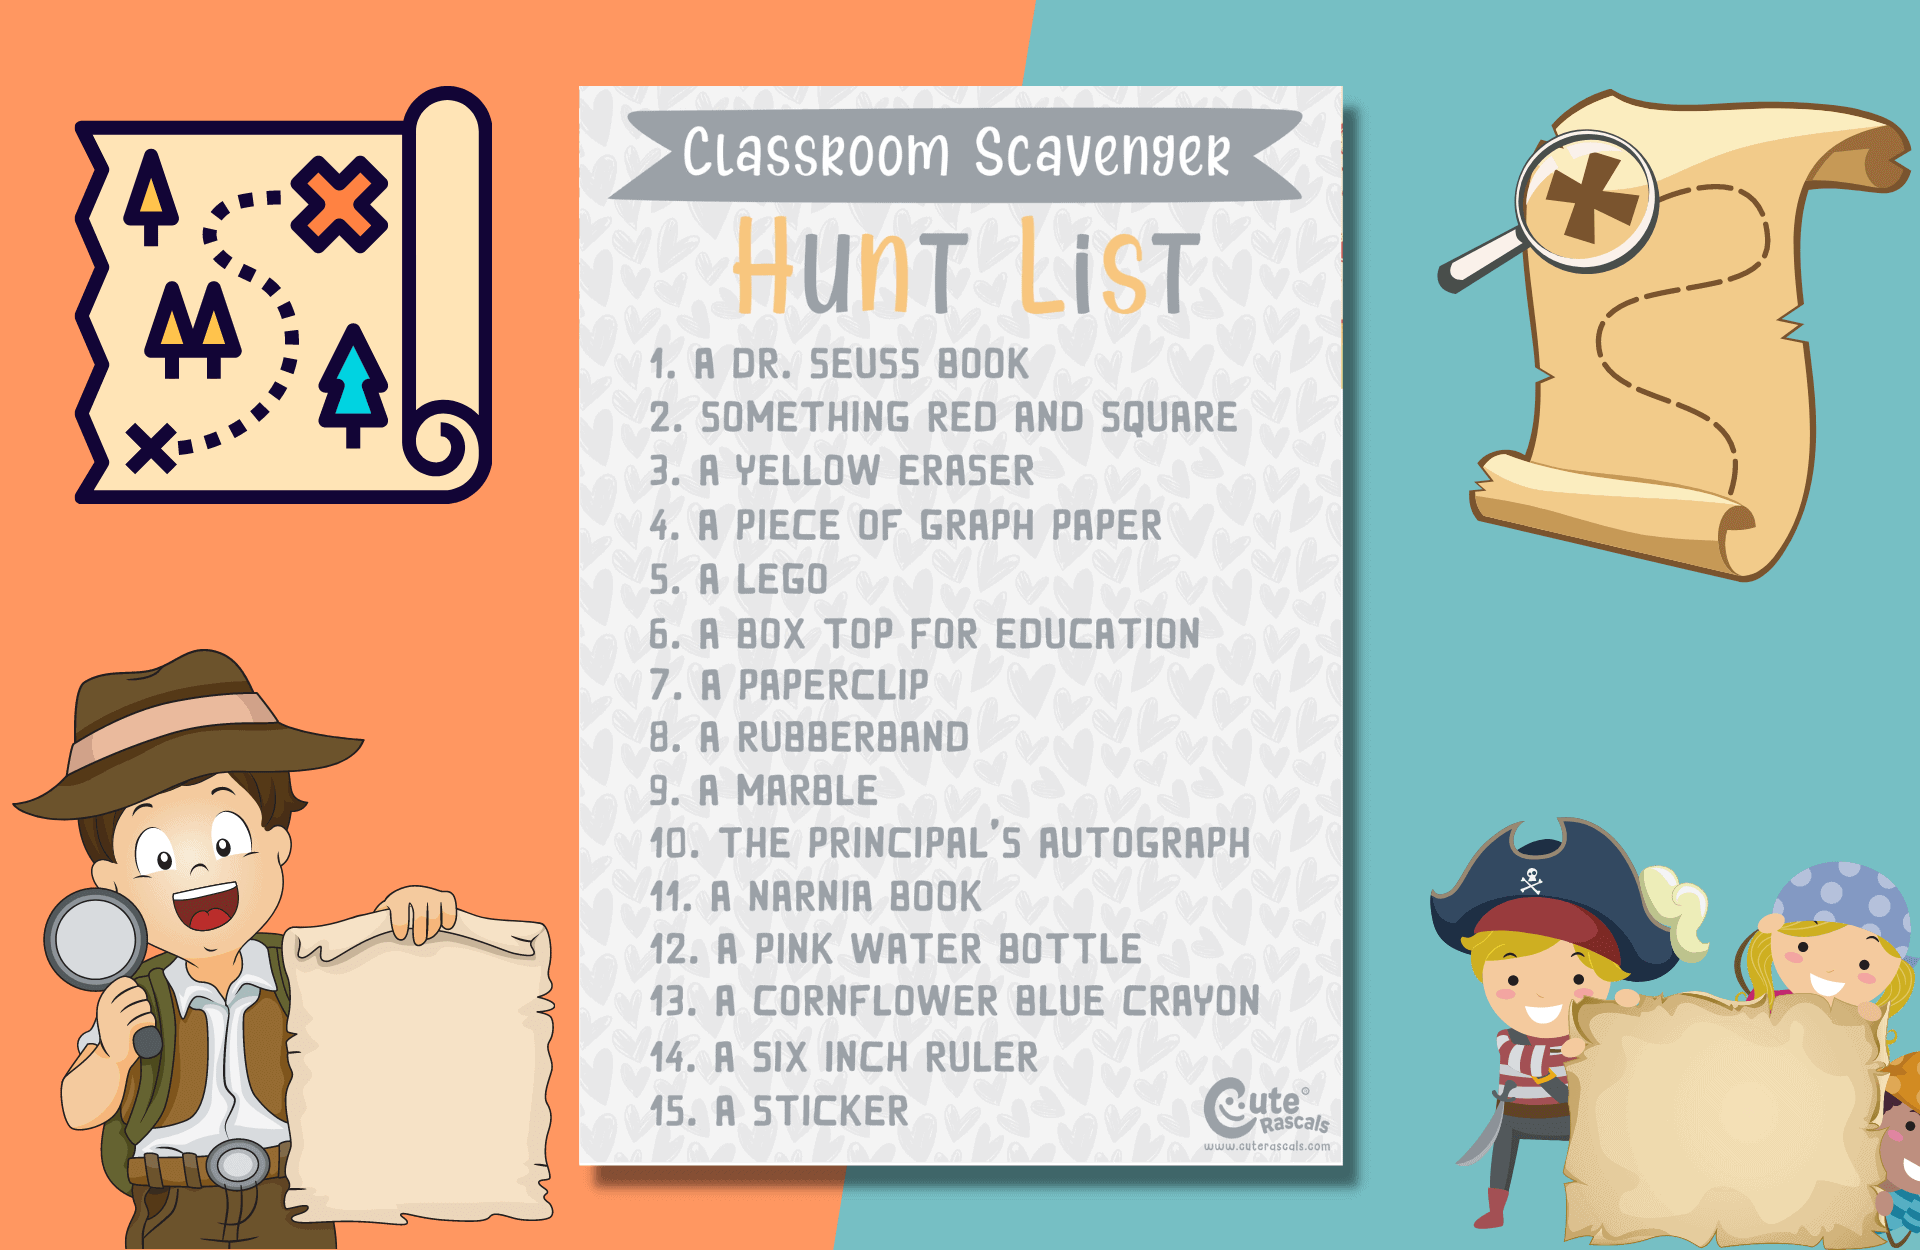 Fun Outdoor Classroom Scavenger Hunt For Kids To Enjoy While Learning